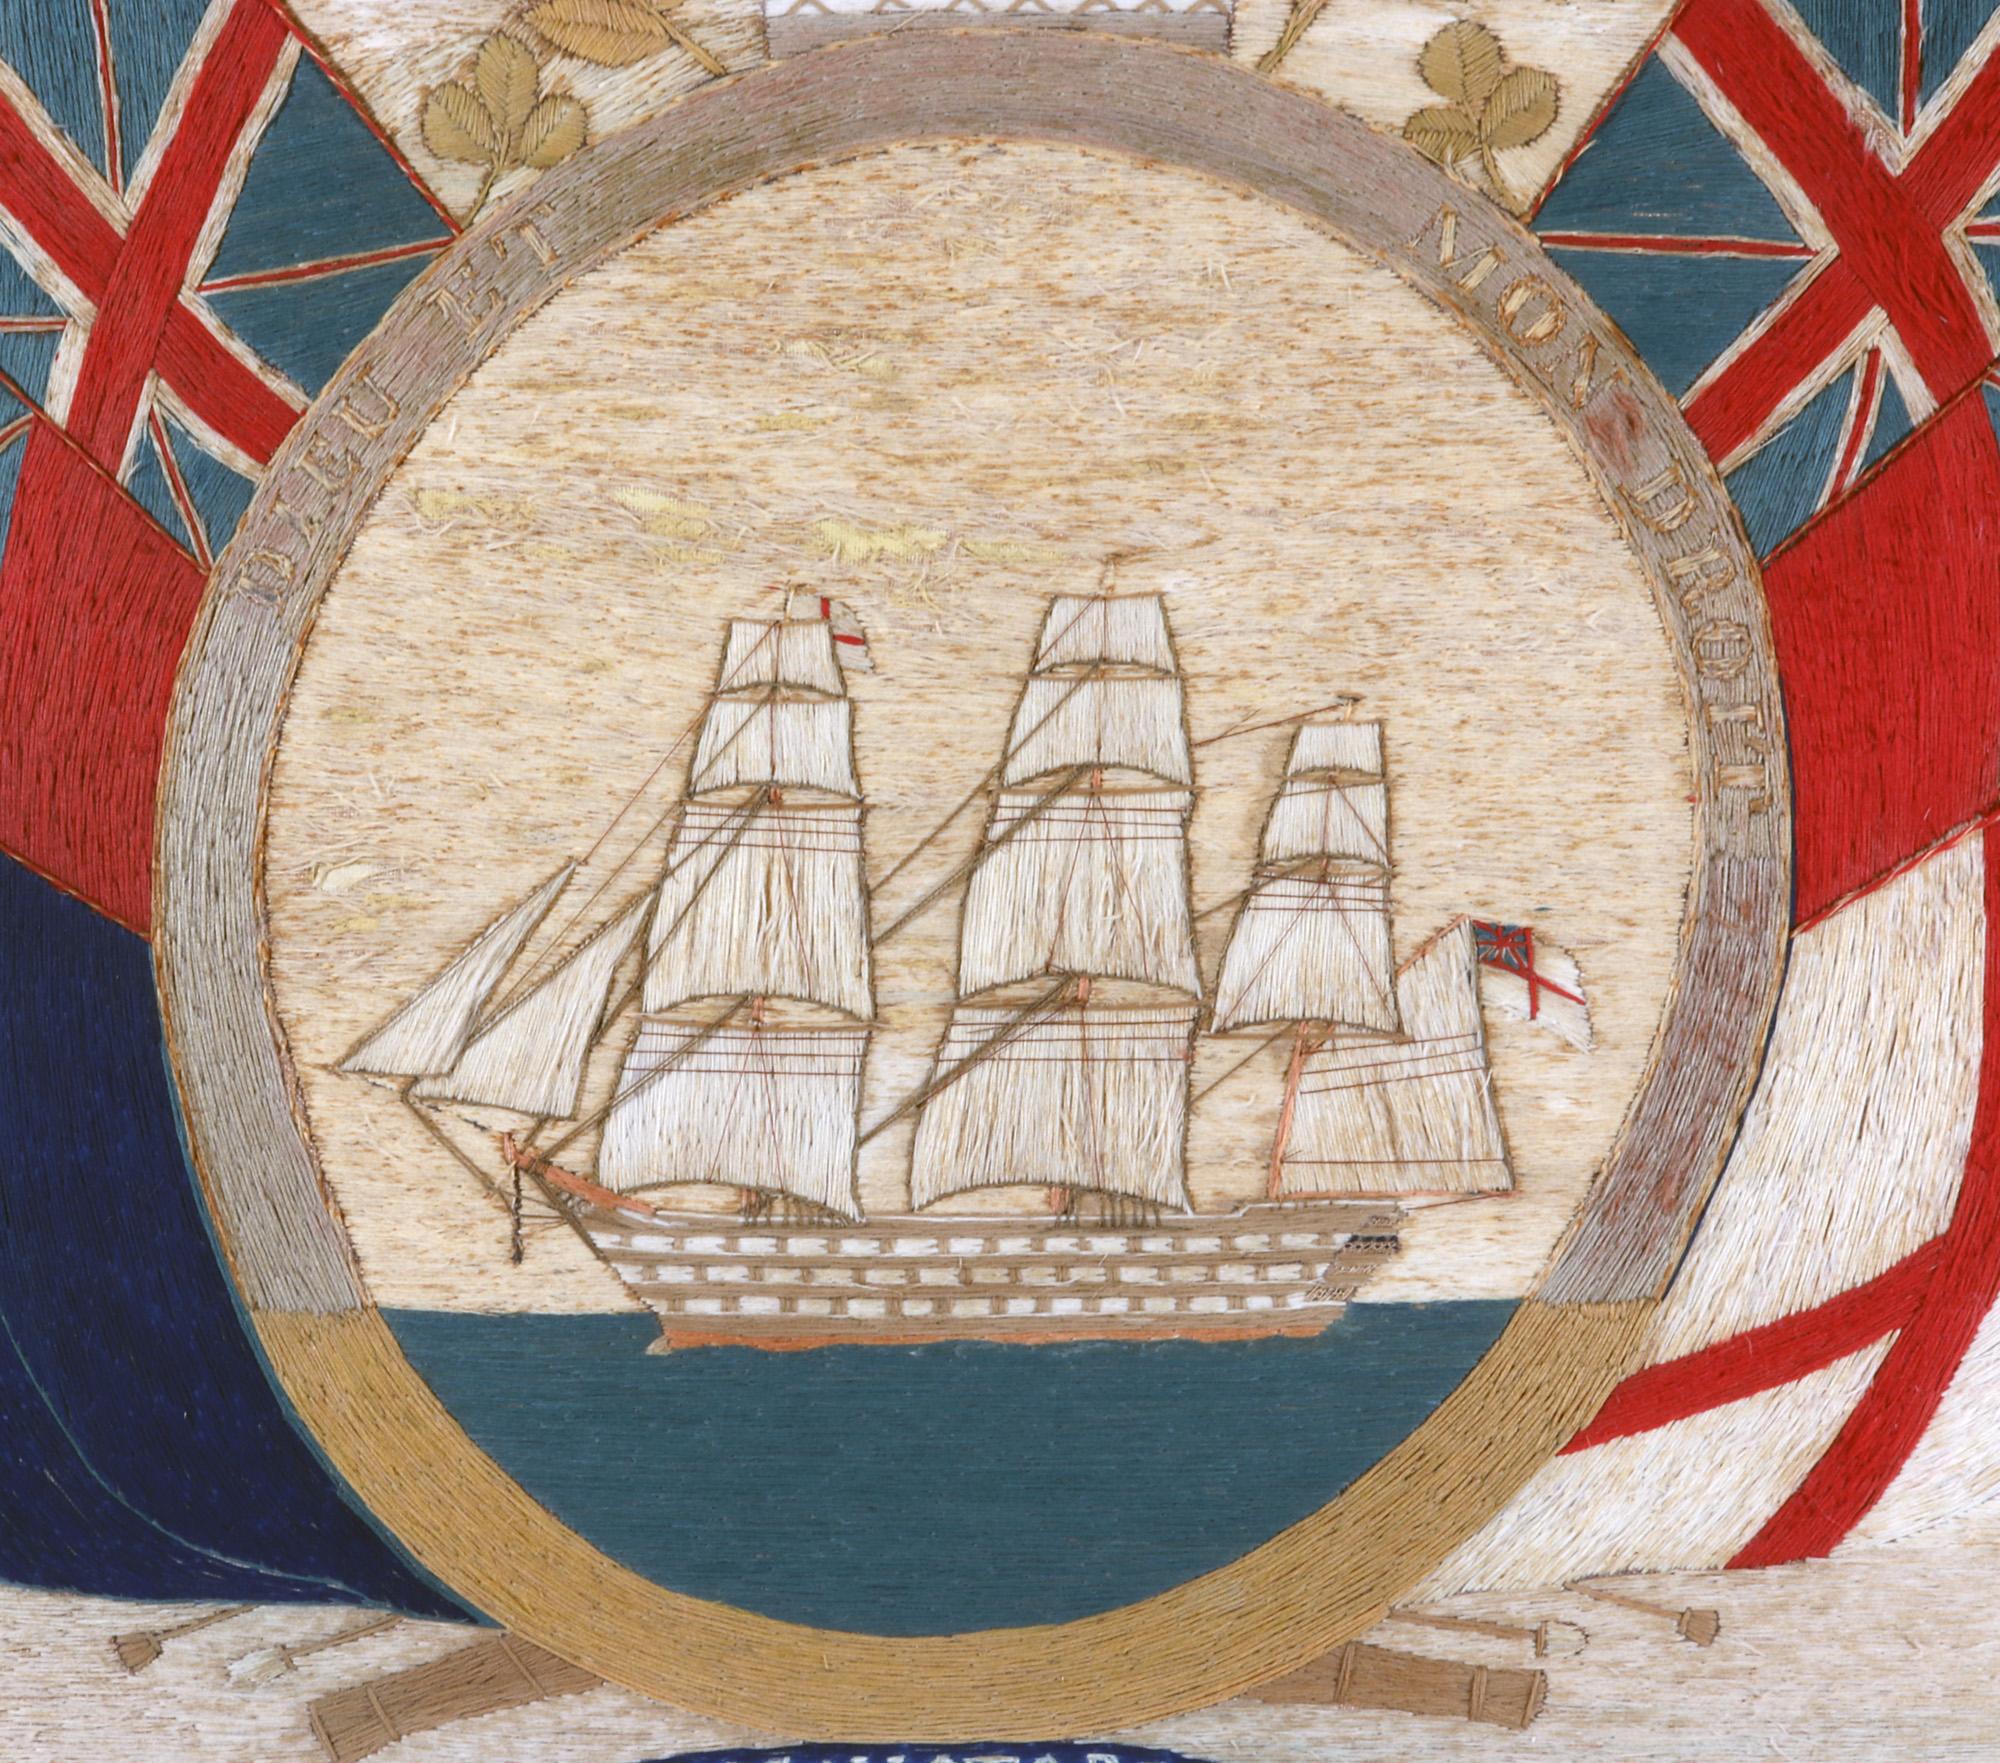 British Sailor's Flag of Nations Woolwork of HMS Victoria
circa 1875

The large sailor's woolie depicts a view of portside view of HMS Victoria within a central porthole view which is surmounted with a crown and the white rose of England and the